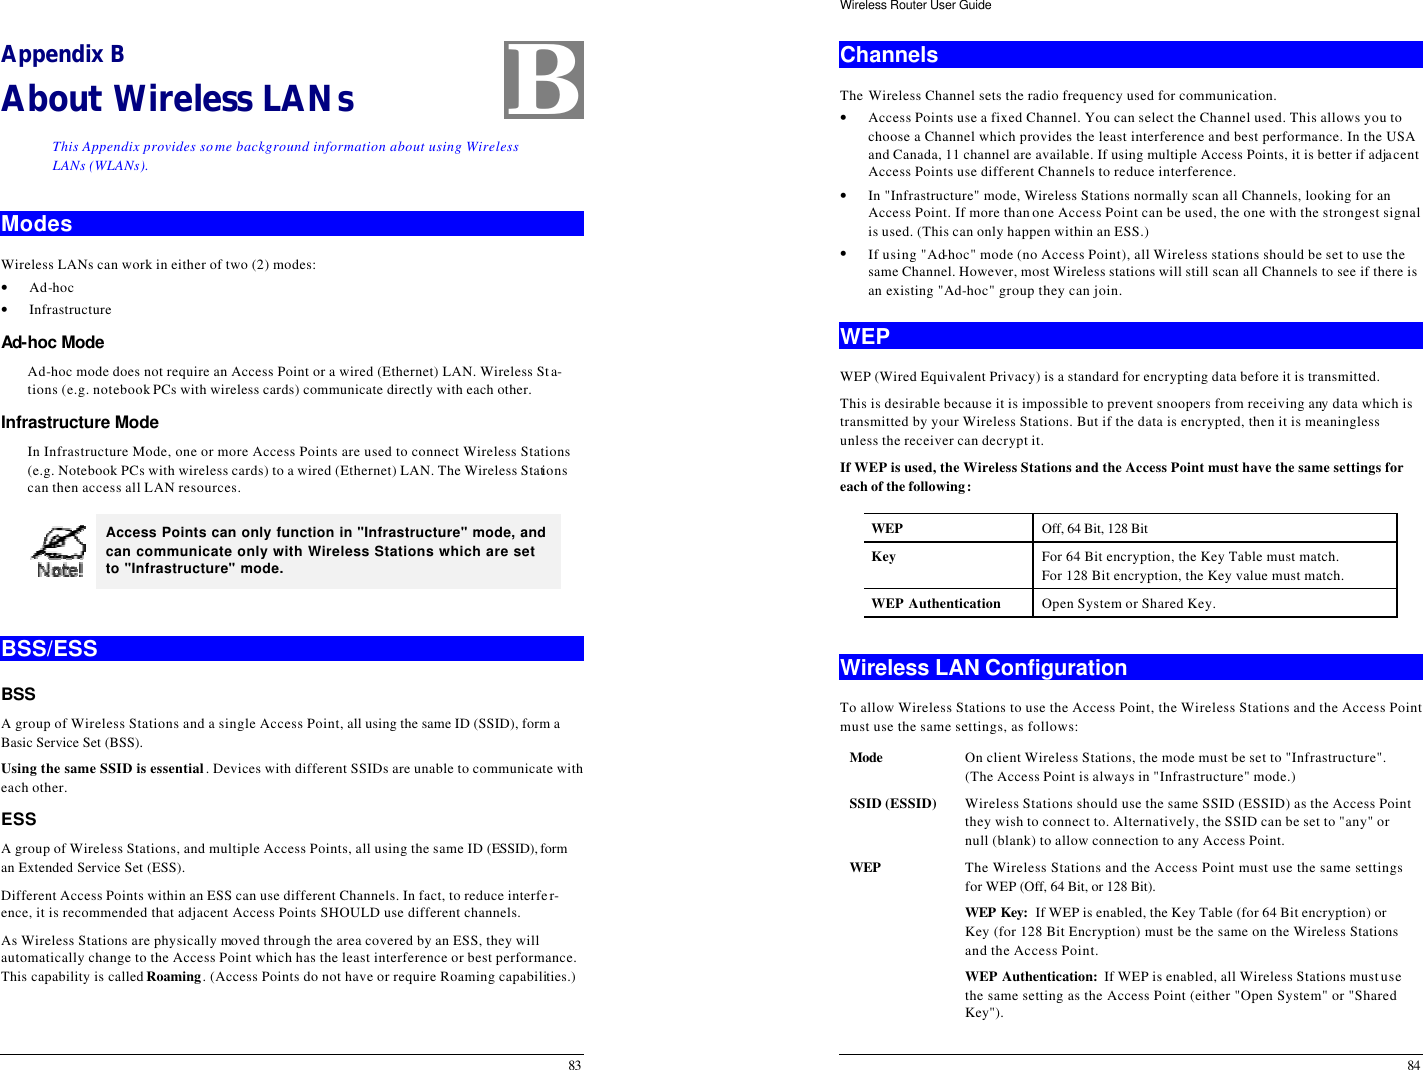  83 Appendix B About Wireless LANs This Appendix provides some background information about using Wireless LANs (WLANs). Modes Wireless LANs can work in either of two (2) modes: • Ad-hoc • Infrastructure Ad-hoc Mode  Ad-hoc mode does not require an Access Point or a wired (Ethernet) LAN. Wireless Sta-tions (e.g. notebook PCs with wireless cards) communicate directly with each other. Infrastructure Mode  In Infrastructure Mode, one or more Access Points are used to connect Wireless Stations (e.g. Notebook PCs with wireless cards) to a wired (Ethernet) LAN. The Wireless Stations can then access all LAN resources.  Access Points can only function in &quot;Infrastructure&quot; mode, and can communicate only with Wireless Stations which are set to &quot;Infrastructure&quot; mode.  BSS/ESS BSS A group of Wireless Stations and a single Access Point, all using the same ID (SSID), form a Basic Service Set (BSS).  Using the same SSID is essential. Devices with different SSIDs are unable to communicate with each other. ESS A group of Wireless Stations, and multiple Access Points, all using the same ID (ESSID), form an Extended Service Set (ESS). Different Access Points within an ESS can use different Channels. In fact, to reduce interfer-ence, it is recommended that adjacent Access Points SHOULD use different channels. As Wireless Stations are physically moved through the area covered by an ESS, they will automatically change to the Access Point which has the least interference or best performance. This capability is called Roaming. (Access Points do not have or require Roaming capabilities.) B Wireless Router User Guide 84 Channels The Wireless Channel sets the radio frequency used for communication.  • Access Points use a fixed Channel. You can select the Channel used. This allows you to choose a Channel which provides the least interference and best performance. In the USA and Canada, 11 channel are available. If using multiple Access Points, it is better if adjacent Access Points use different Channels to reduce interference. • In &quot;Infrastructure&quot; mode, Wireless Stations normally scan all Channels, looking for an Access Point. If more than one Access Point can be used, the one with the strongest signal is used. (This can only happen within an ESS.) • If using &quot;Ad-hoc&quot; mode (no Access Point), all Wireless stations should be set to use the same Channel. However, most Wireless stations will still scan all Channels to see if there is an existing &quot;Ad-hoc&quot; group they can join. WEP WEP (Wired Equivalent Privacy) is a standard for encrypting data before it is transmitted.  This is desirable because it is impossible to prevent snoopers from receiving any data which is transmitted by your Wireless Stations. But if the data is encrypted, then it is meaningless unless the receiver can decrypt it. If WEP is used, the Wireless Stations and the Access Point must have the same settings for each of the following: WEP Off, 64 Bit, 128 Bit Key For 64 Bit encryption, the Key Table must match.  For 128 Bit encryption, the Key value must match. WEP Authentication Open System or Shared Key.  Wireless LAN Configuration To allow Wireless Stations to use the Access Point, the Wireless Stations and the Access Point must use the same settings, as follows: Mode On client Wireless Stations, the mode must be set to &quot;Infrastructure&quot;. (The Access Point is always in &quot;Infrastructure&quot; mode.) SSID (ESSID) Wireless Stations should use the same SSID (ESSID) as the Access Point they wish to connect to. Alternatively, the SSID can be set to &quot;any&quot; or null (blank) to allow connection to any Access Point. WEP The Wireless Stations and the Access Point must use the same settings for WEP (Off, 64 Bit, or 128 Bit). WEP Key:  If WEP is enabled, the Key Table (for 64 Bit encryption) or Key (for 128 Bit Encryption) must be the same on the Wireless Stations and the Access Point. WEP Authentication:  If WEP is enabled, all Wireless Stations must use the same setting as the Access Point (either &quot;Open System&quot; or &quot;Shared Key&quot;). 